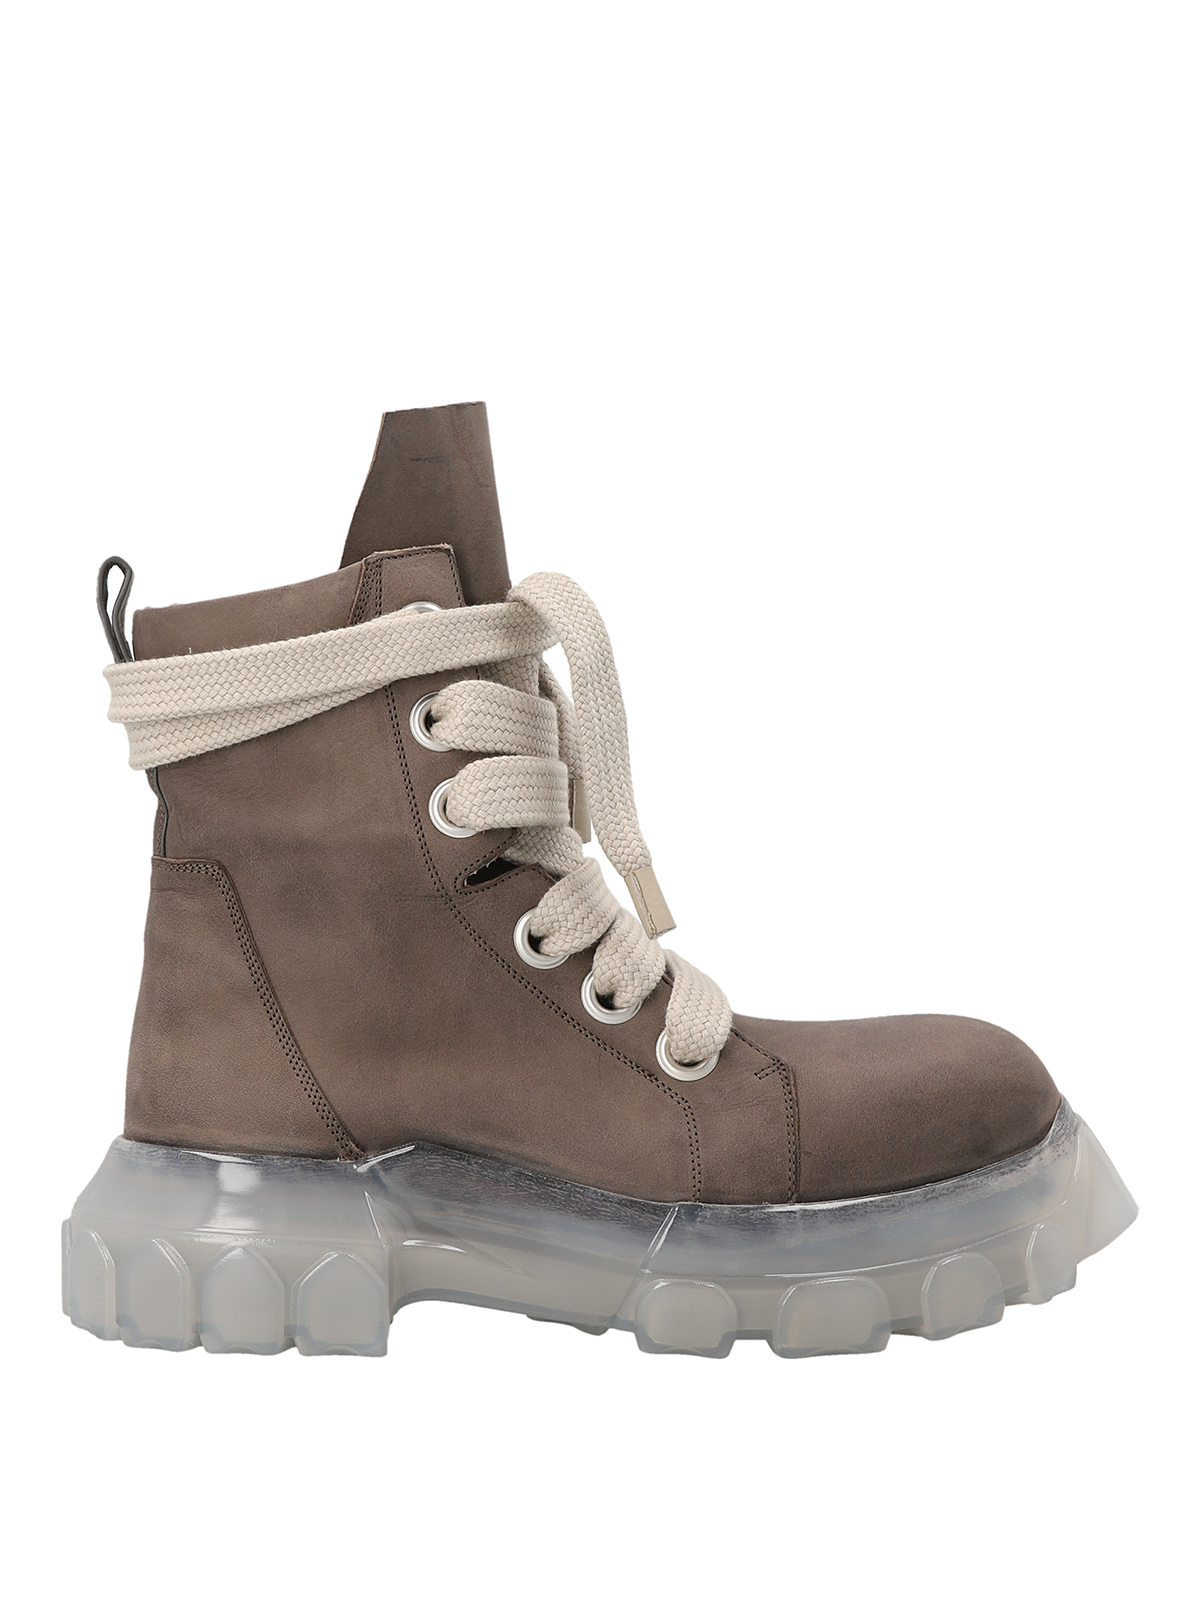 Boots Rick Owens   jumbolaced laceup bozo tractor combat boots